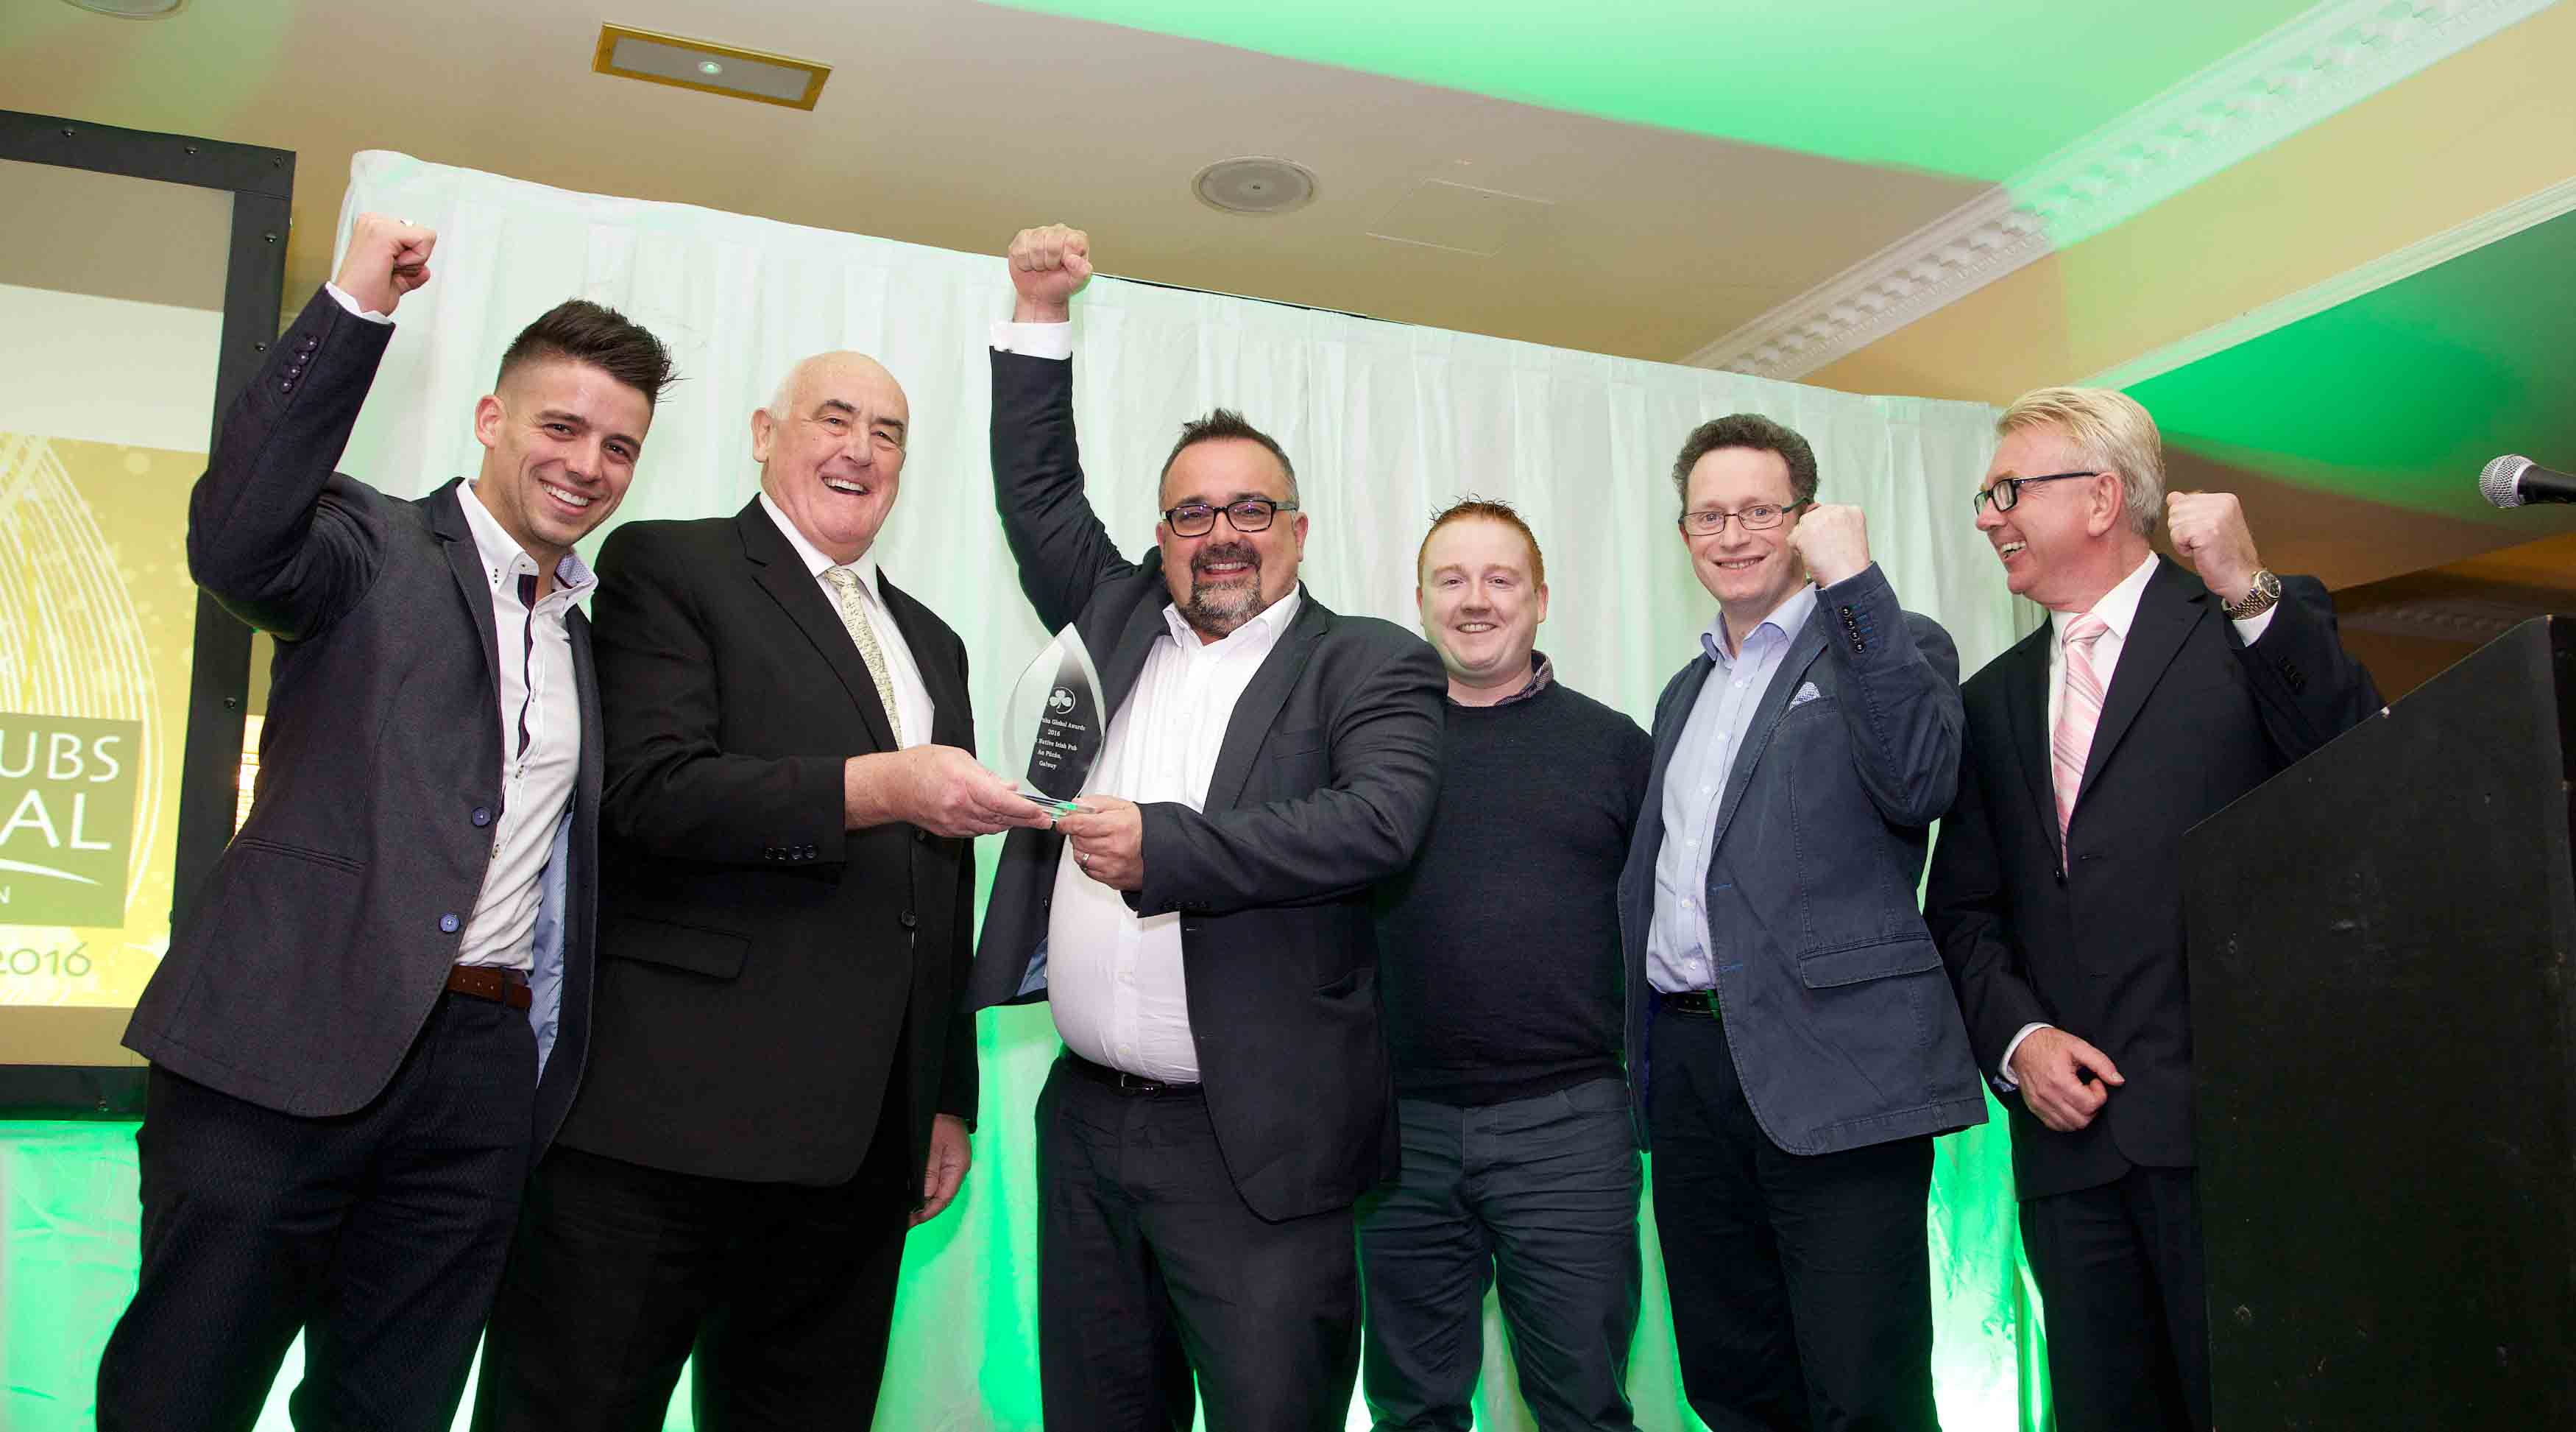 The team from An Púcán celebrate their win with Senator Billy Lawless (2nd left) and (far right) MC for the evening mediateam's John McDonald.